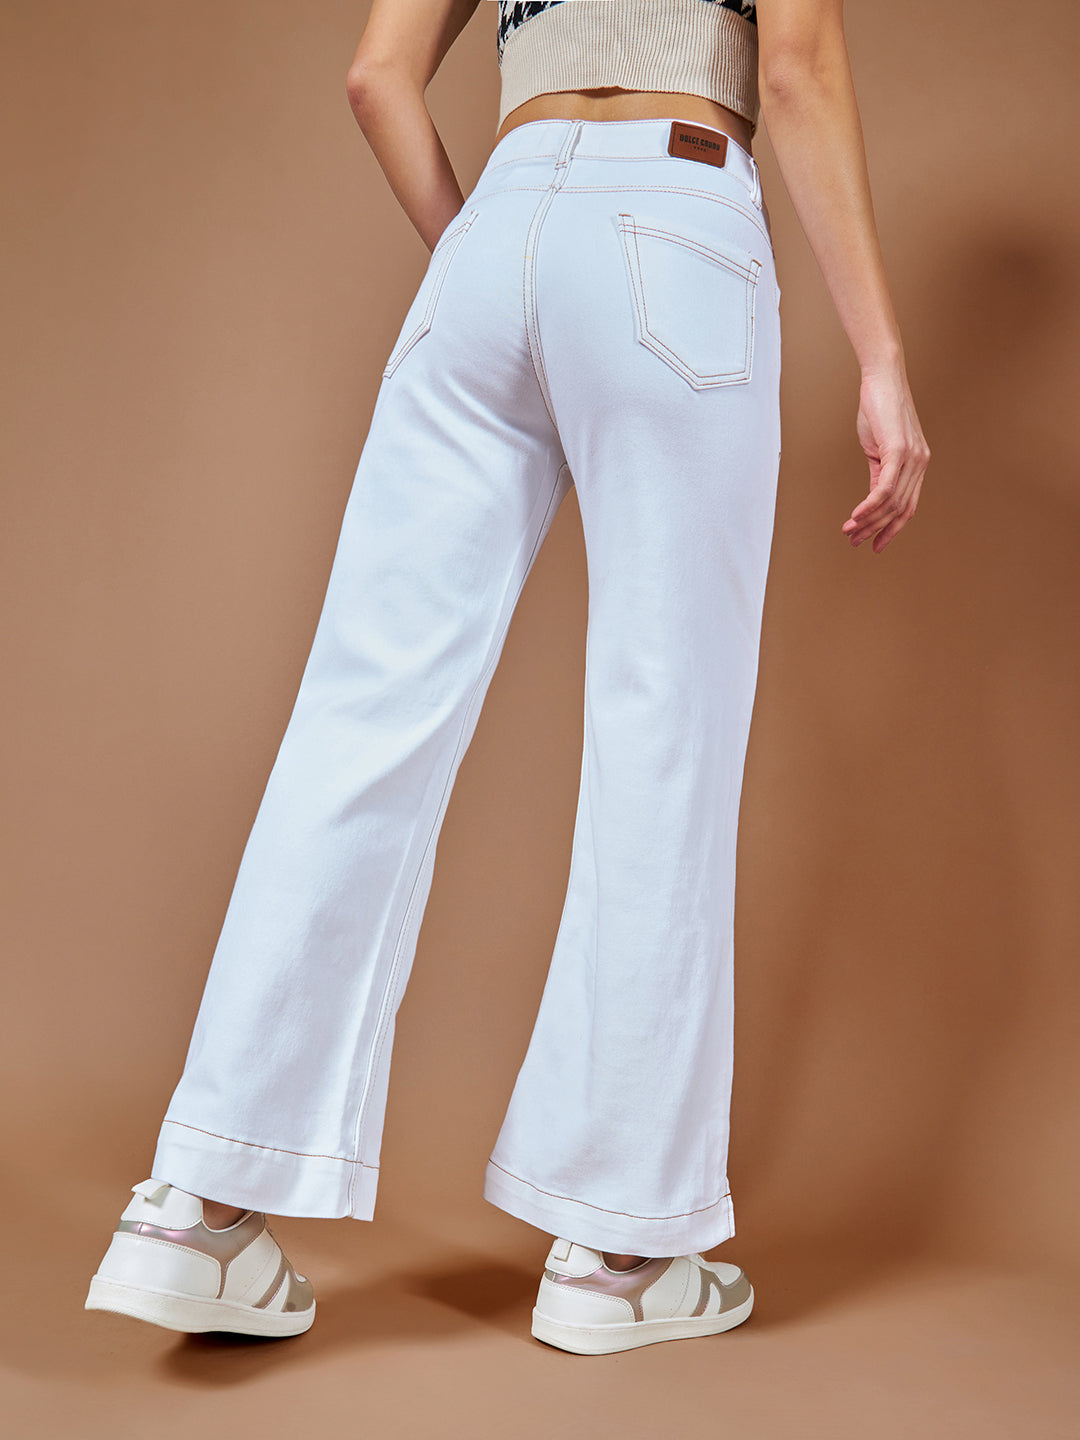 Women's White Flared Mid Rise Clean Look Ankle length Stretchable Denim Jeans